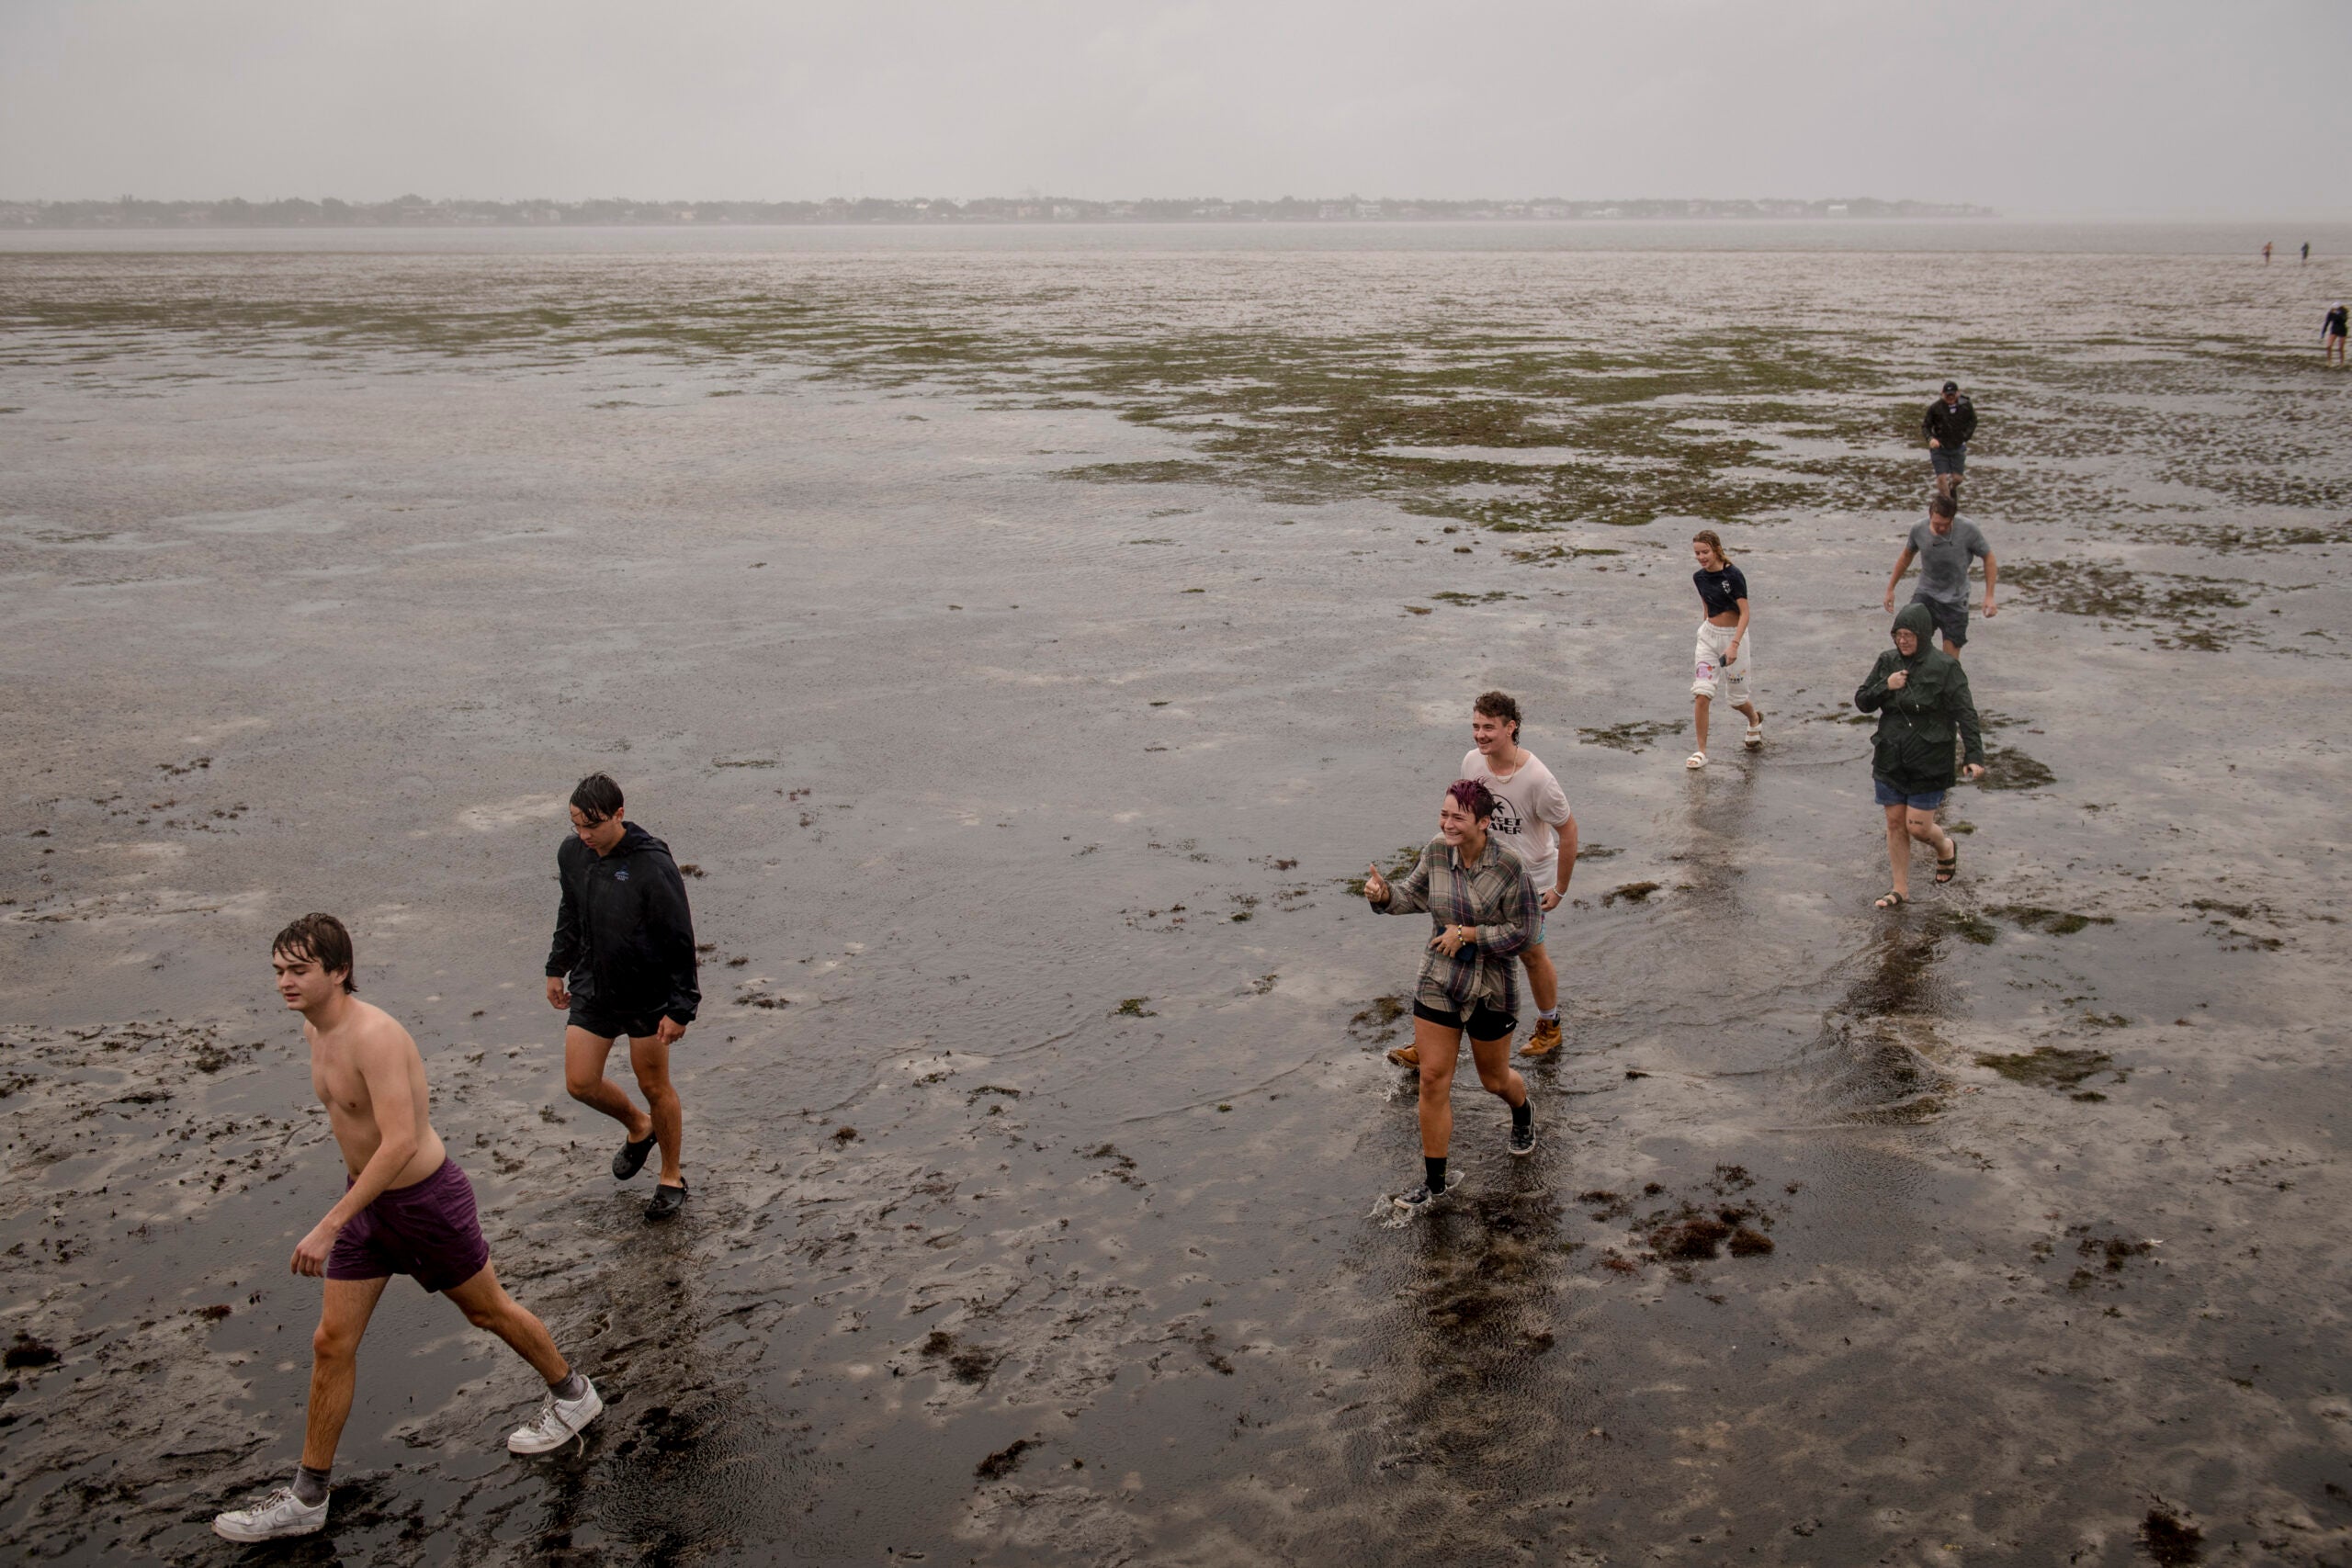 Why water receded from Tampa Bay as Hurricane Ian approached